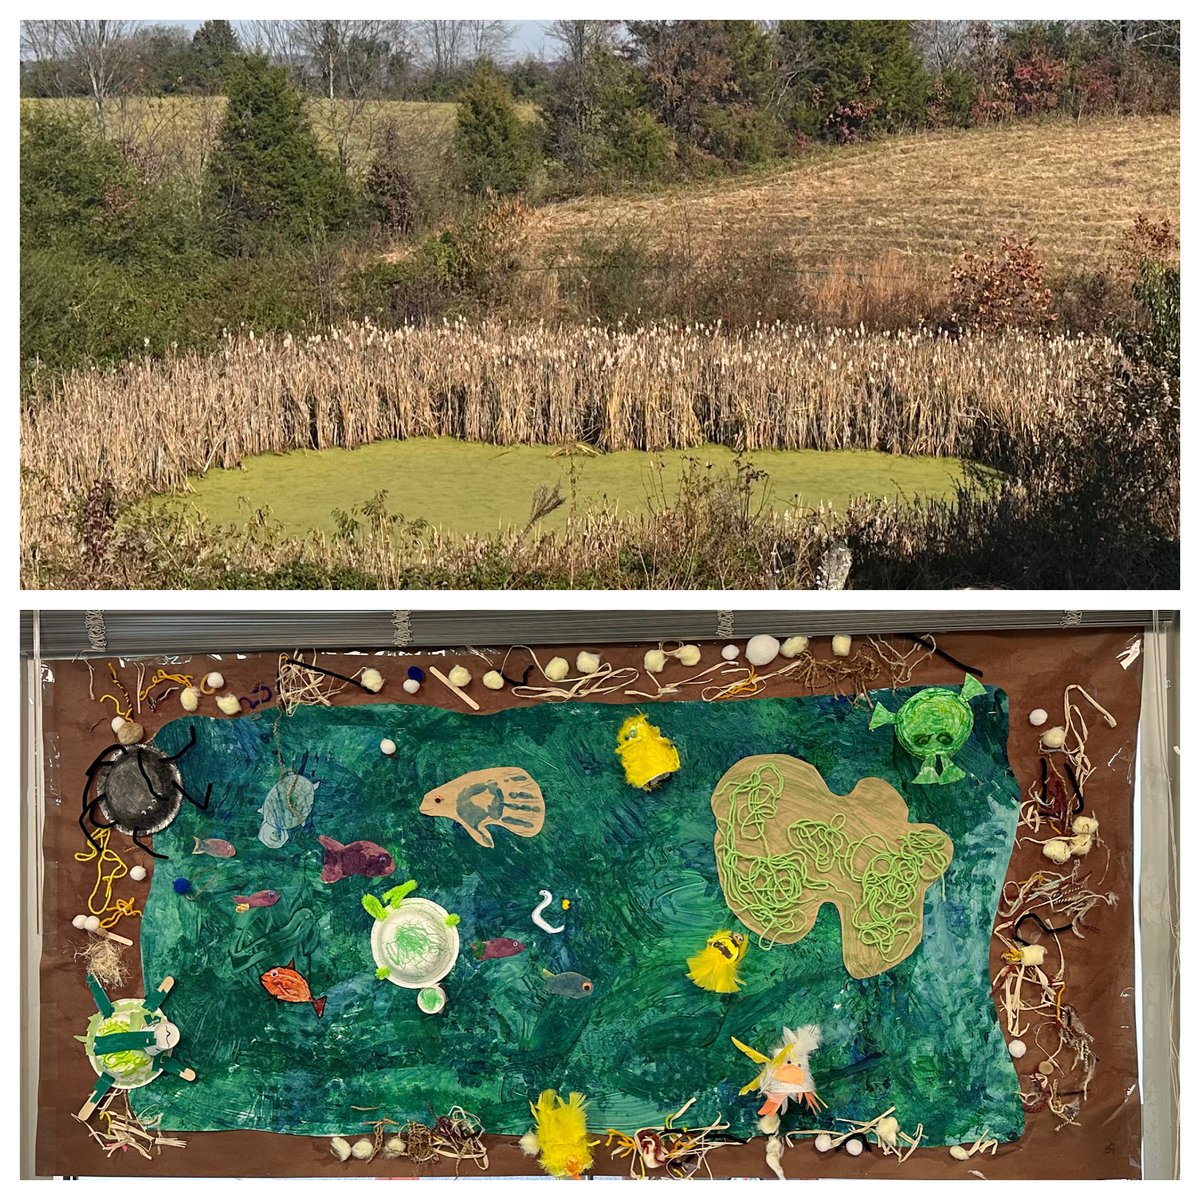 Here is our inspiration and the final product of our collaboration with Ms. Sarah’s preK friends. From our field trip walking to the back pond to our handmade mural! #readingbuddies #fosteringrelationships